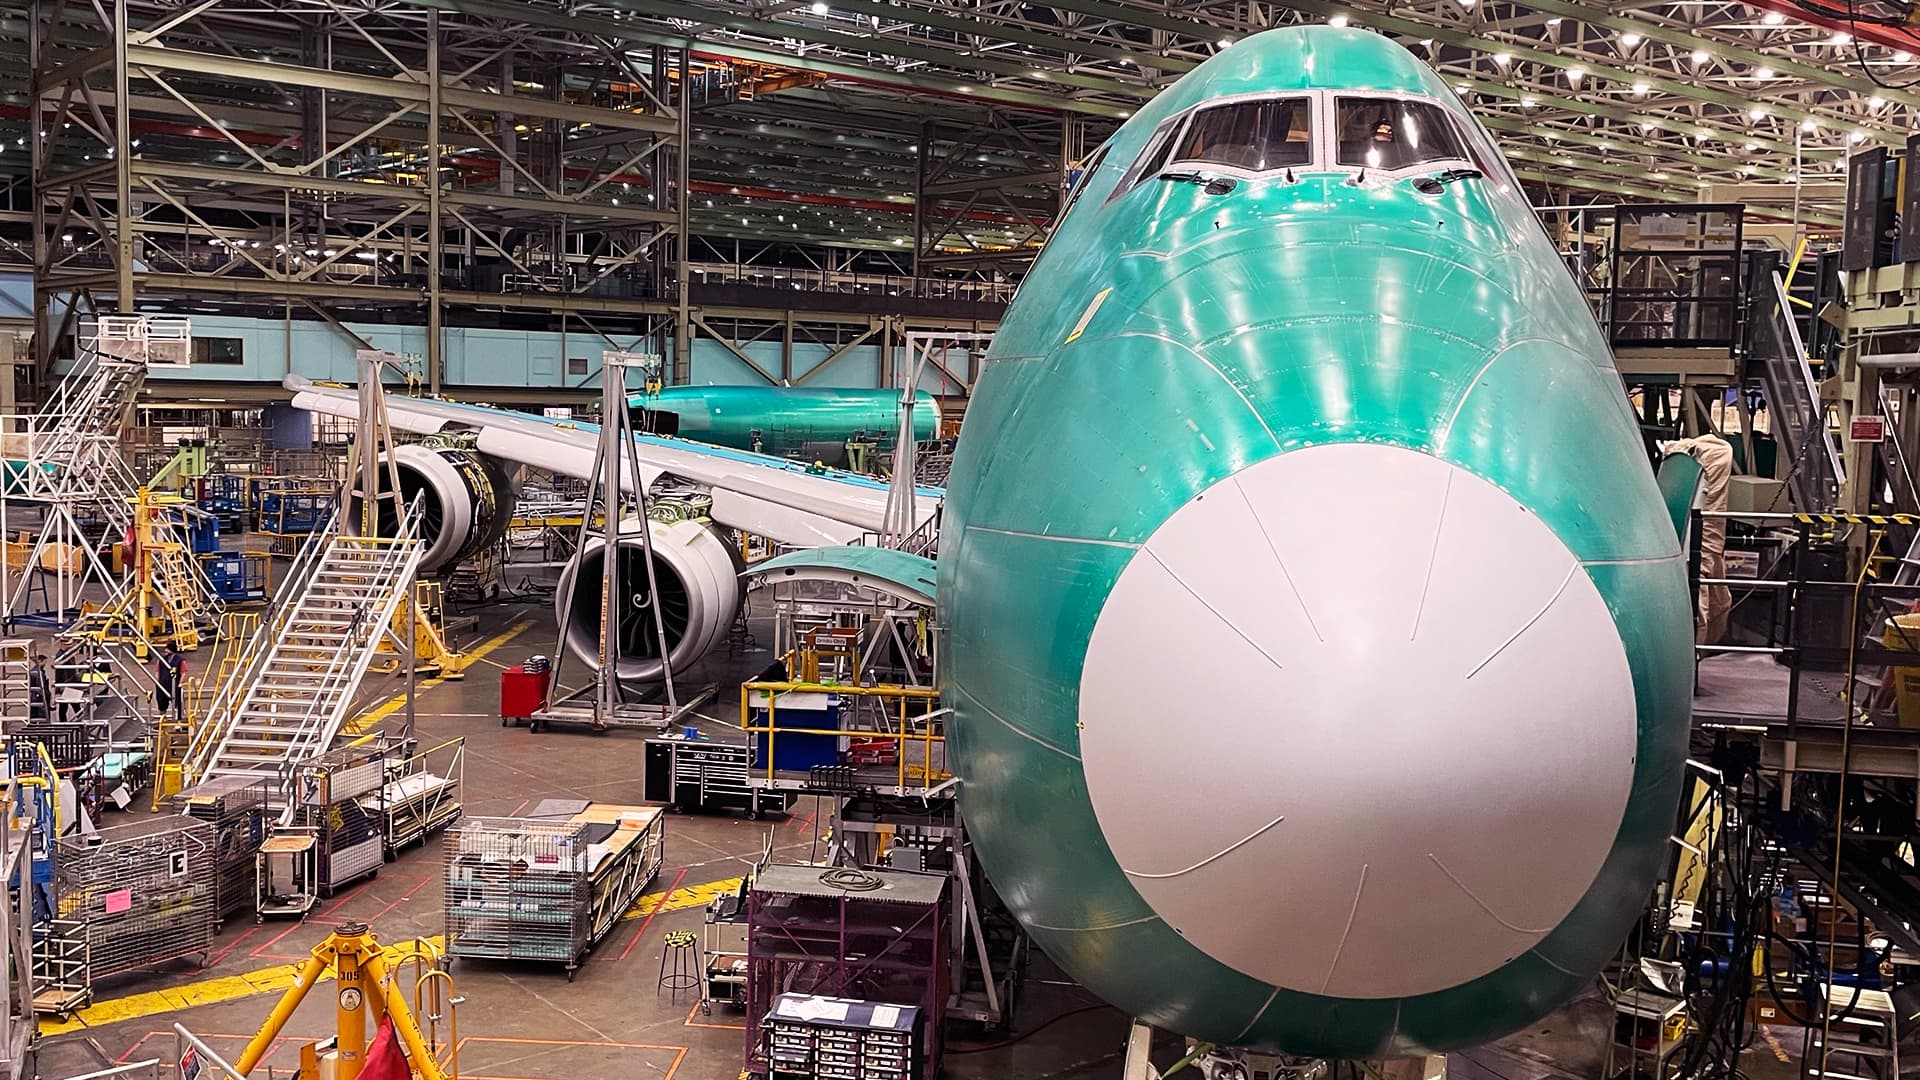 Boeing’s last 747 rolls out of factory after a more than 50-year production run